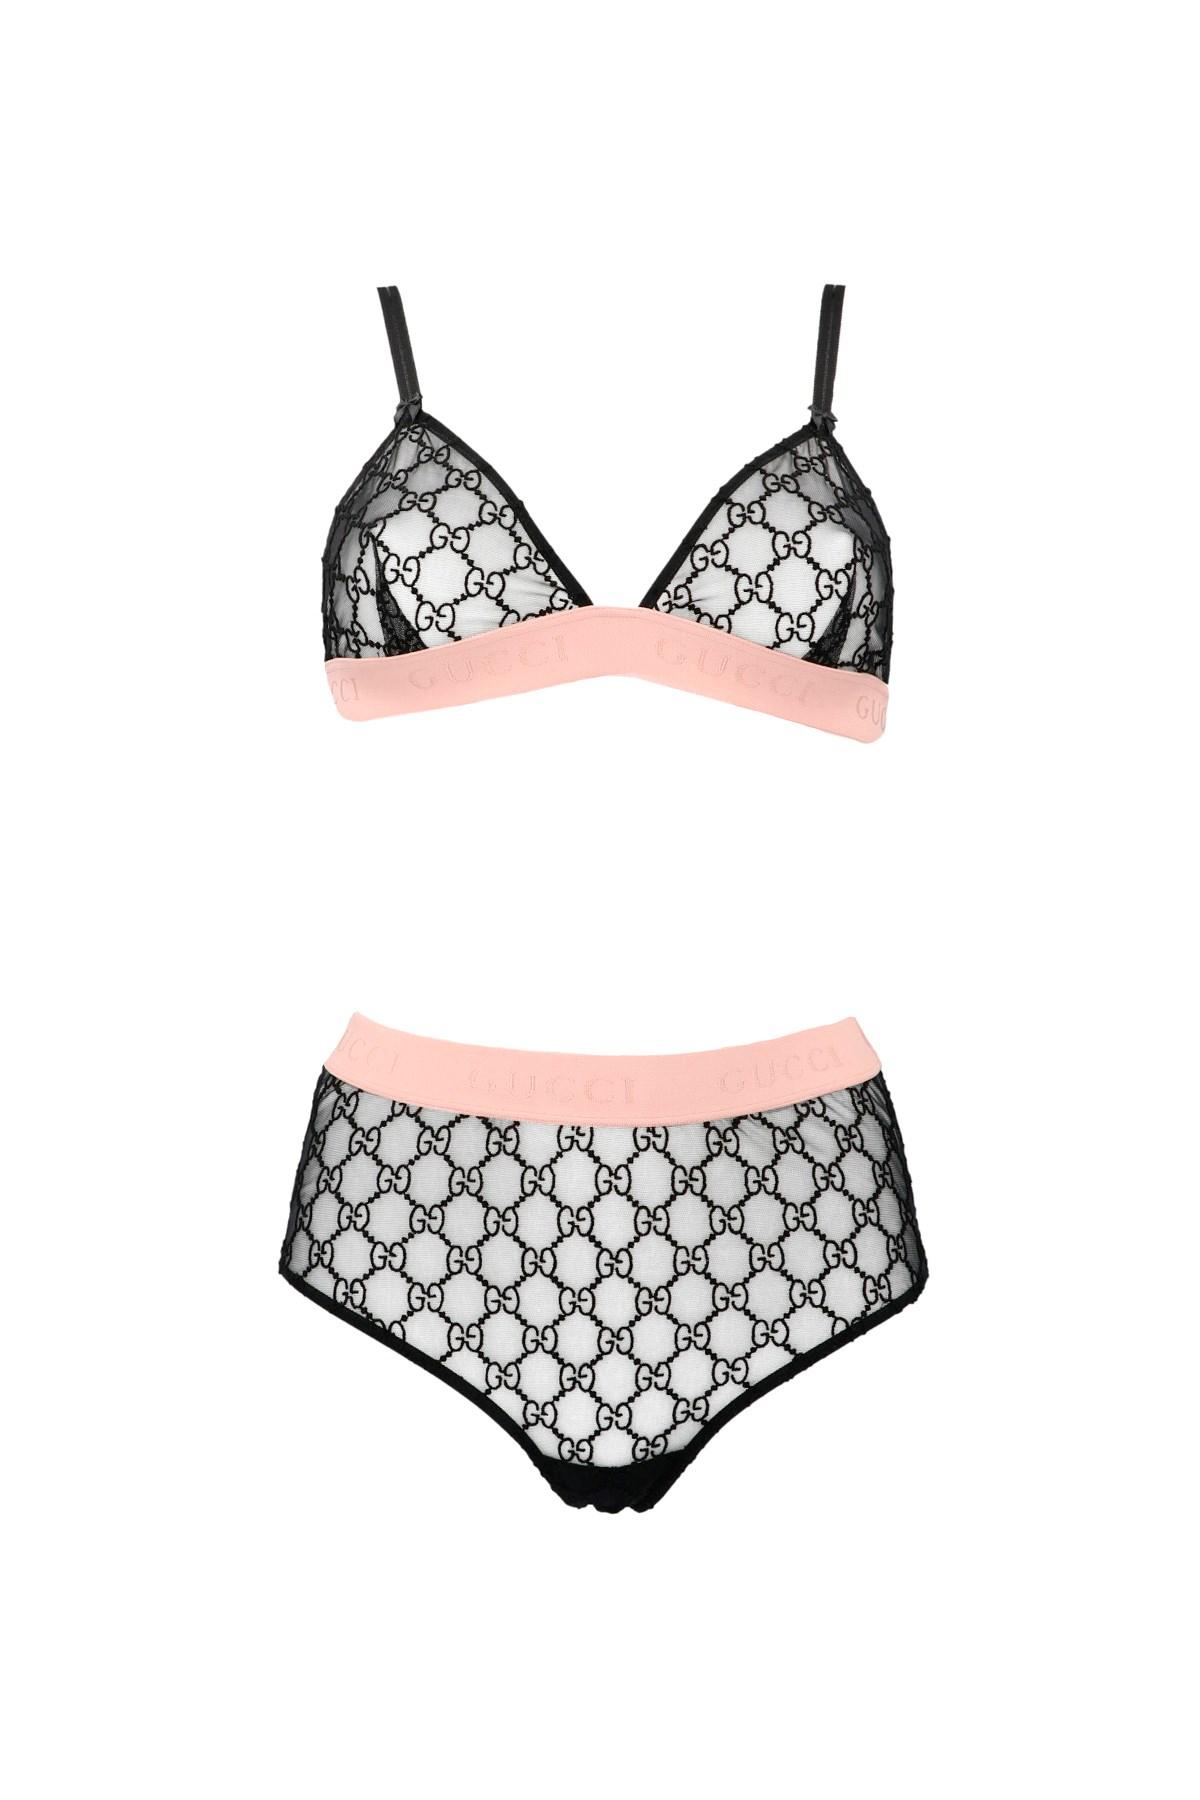 Gucci Synthetic 'GG' Logo Lingerie Set in Black - Lyst